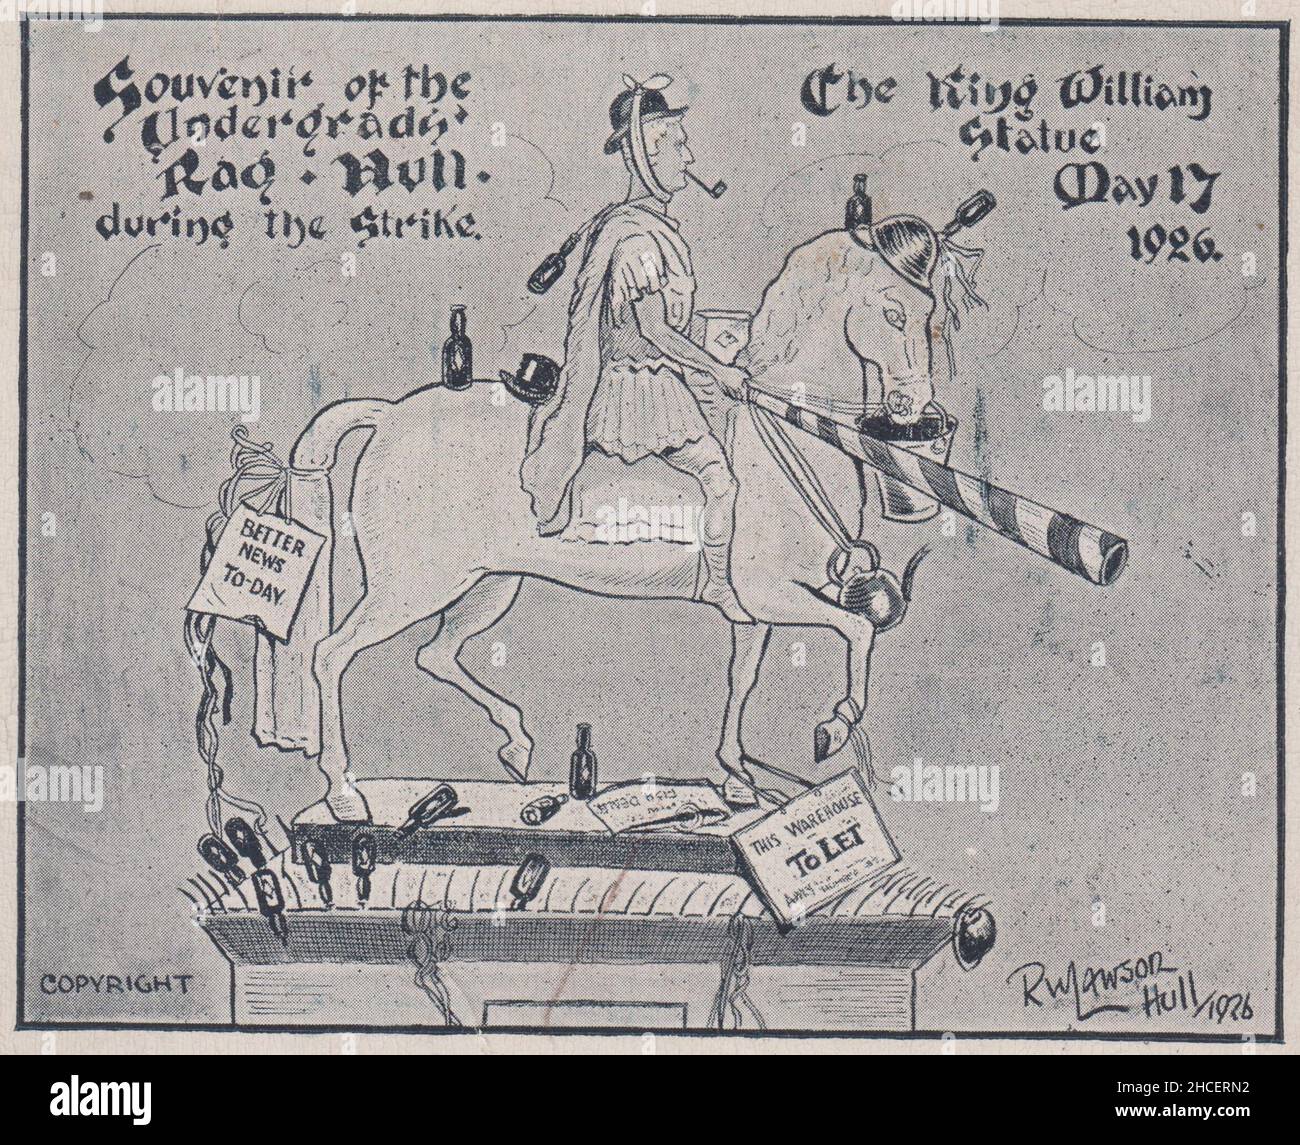 Souvenir of the Undergraduate Rag, Hull, during the General Strike: The King William statue, 17 May 1926. Cartoon by R.W. Lawson showing equestrian statue of King William III decorated by students with hats, pipe, notices and a lot of empty bottles shortly after the end of the General Strike Stock Photo